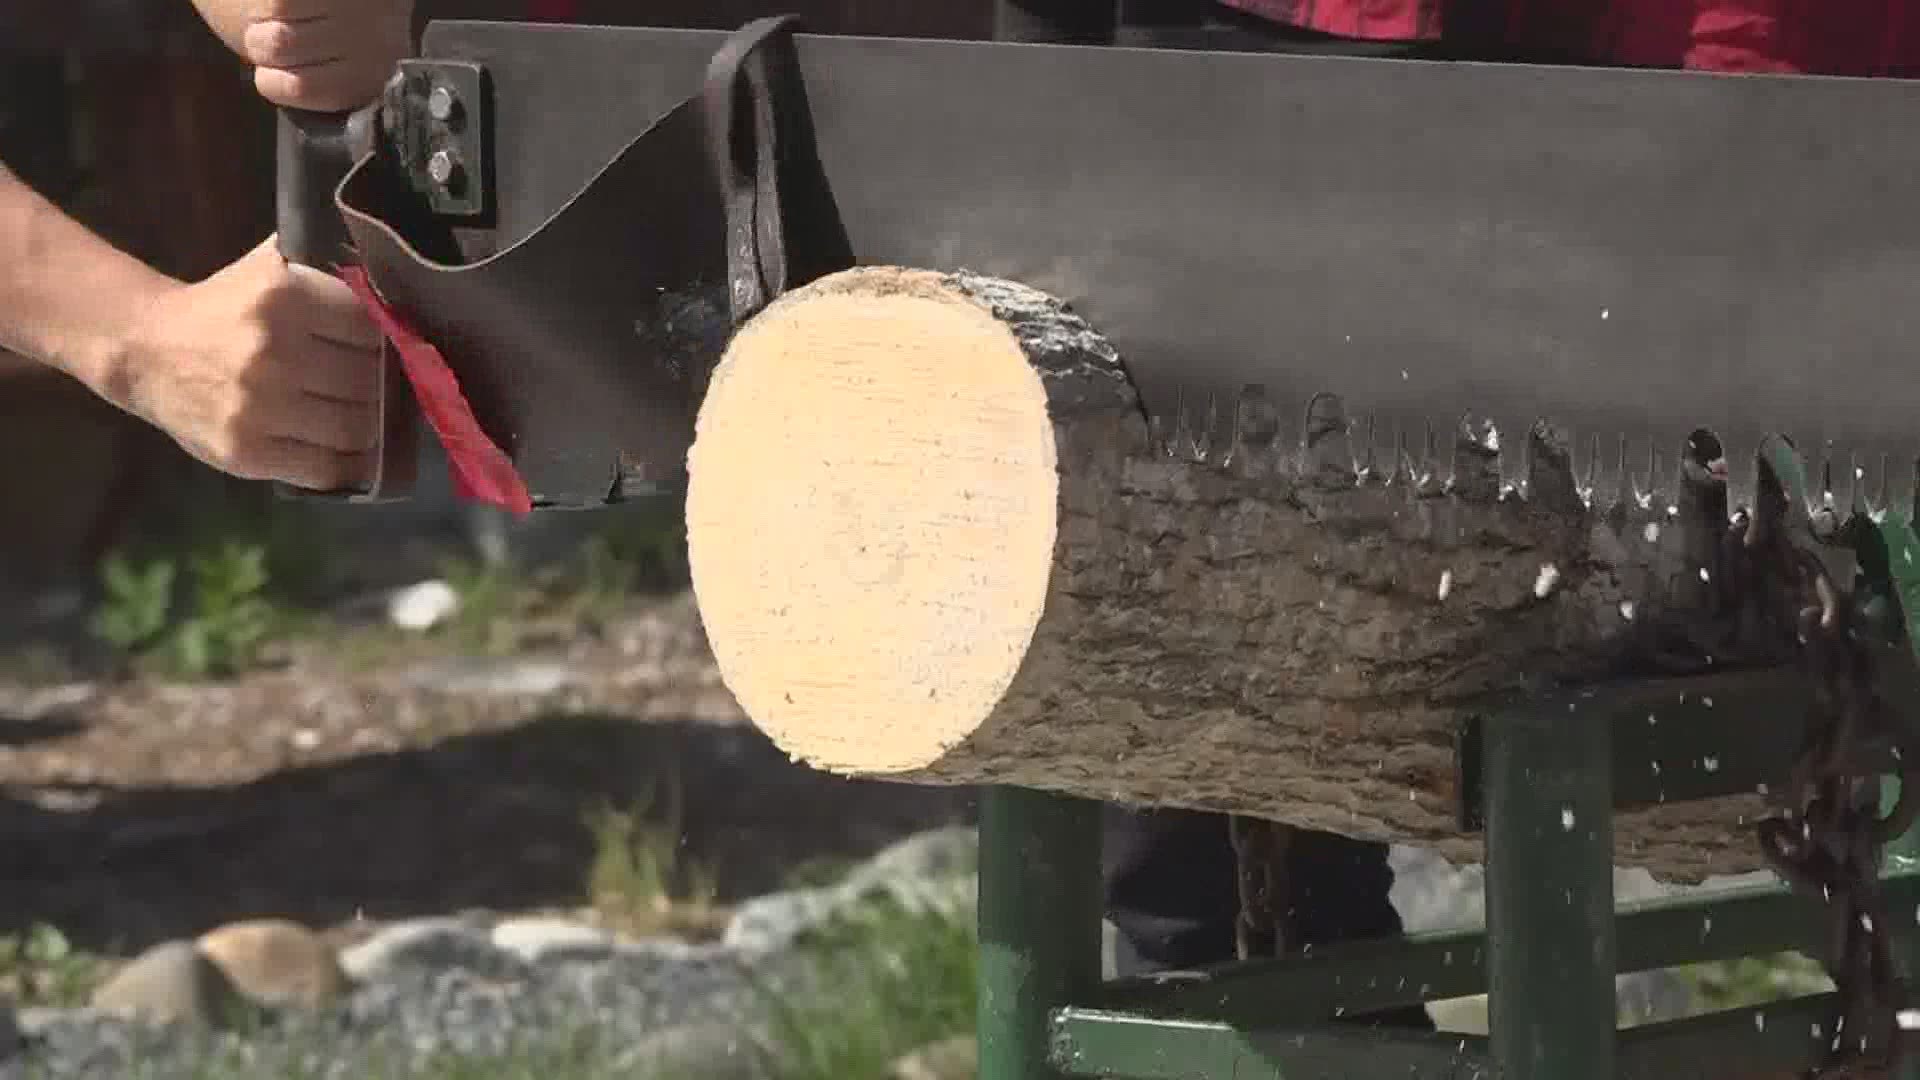 2020 marks the 25th year in business for the Great Maine Lumberjack Show in Trenton. With new measures, staff members have found a way to stay open during COVID-19.